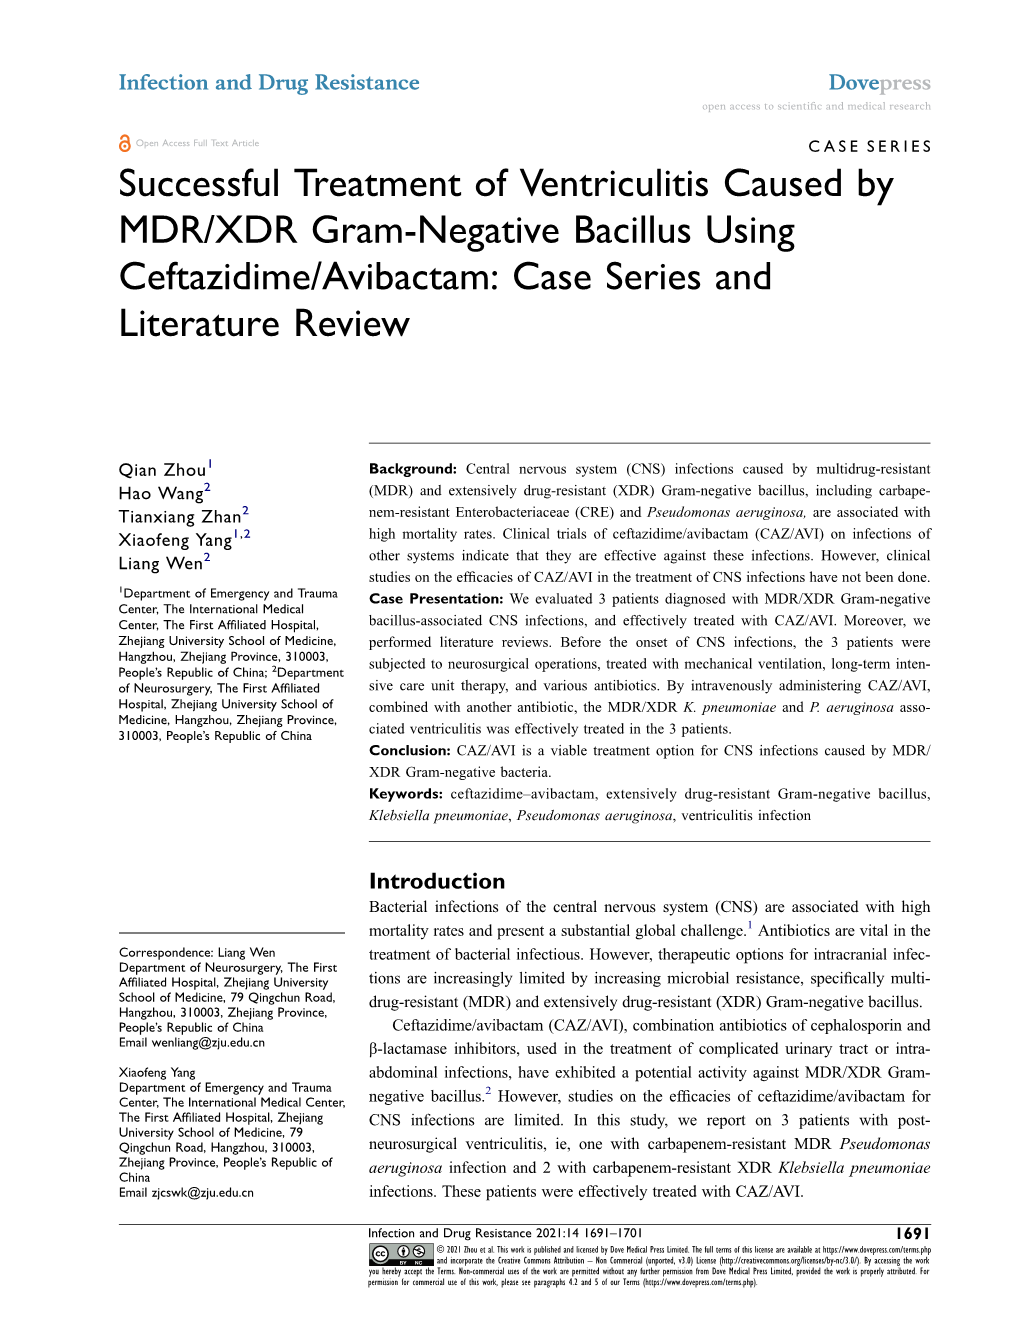 Successful Treatment of Ventriculitis Caused by MDR/XDR Gram-Negative Bacillus Using Ceftazidime/Avibactam: Case Series and Literature Review